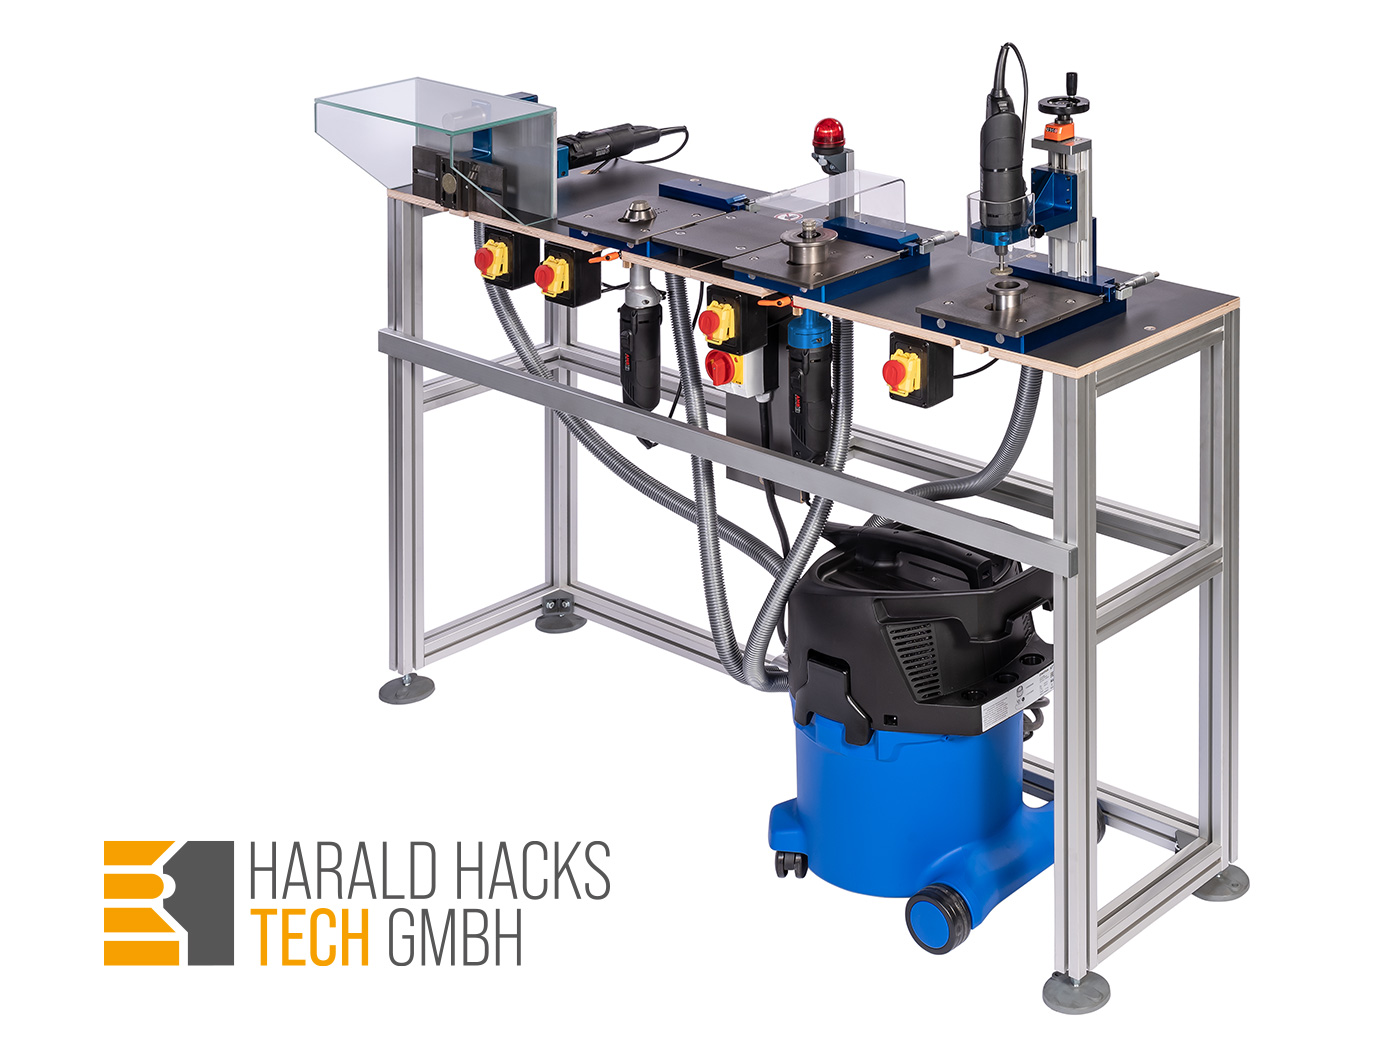 Harald Hacks Neck Ring and Mould Repair System (HHNMRS) - Harald Hacks Tech GmbH - 901408